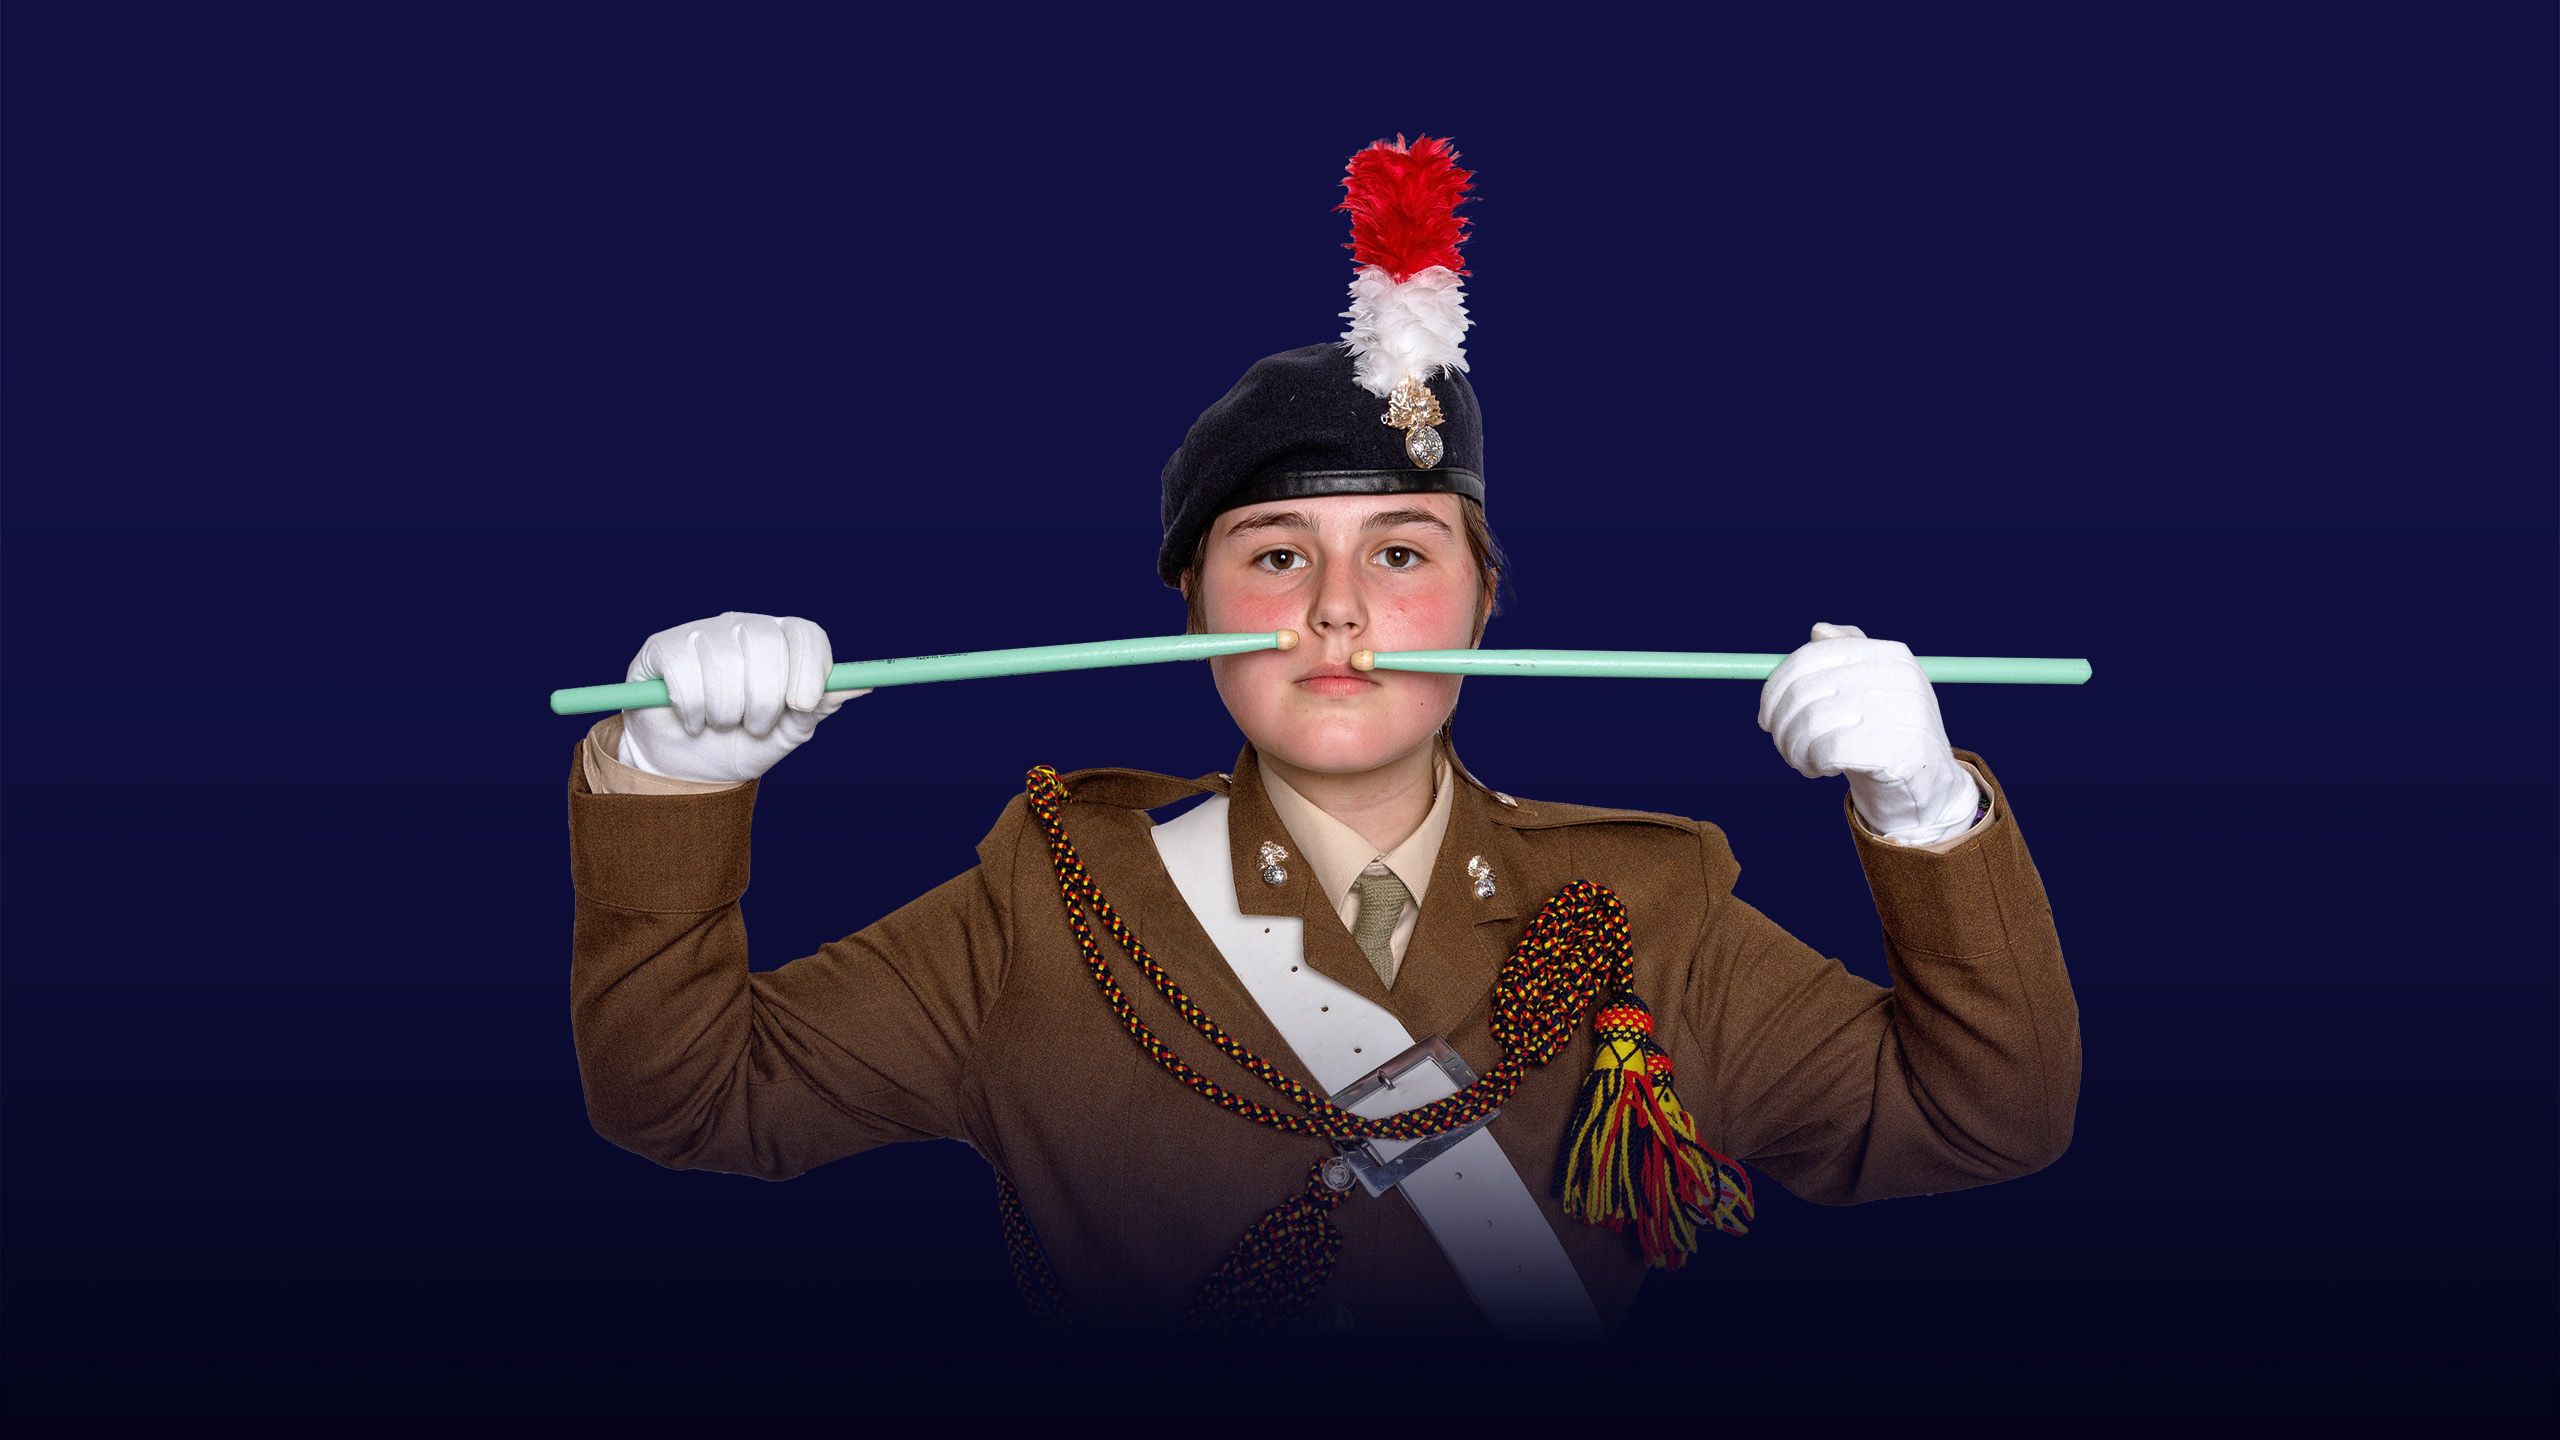 Image of a girl wearing military-like uniform with an overlay of the text "instilling values"